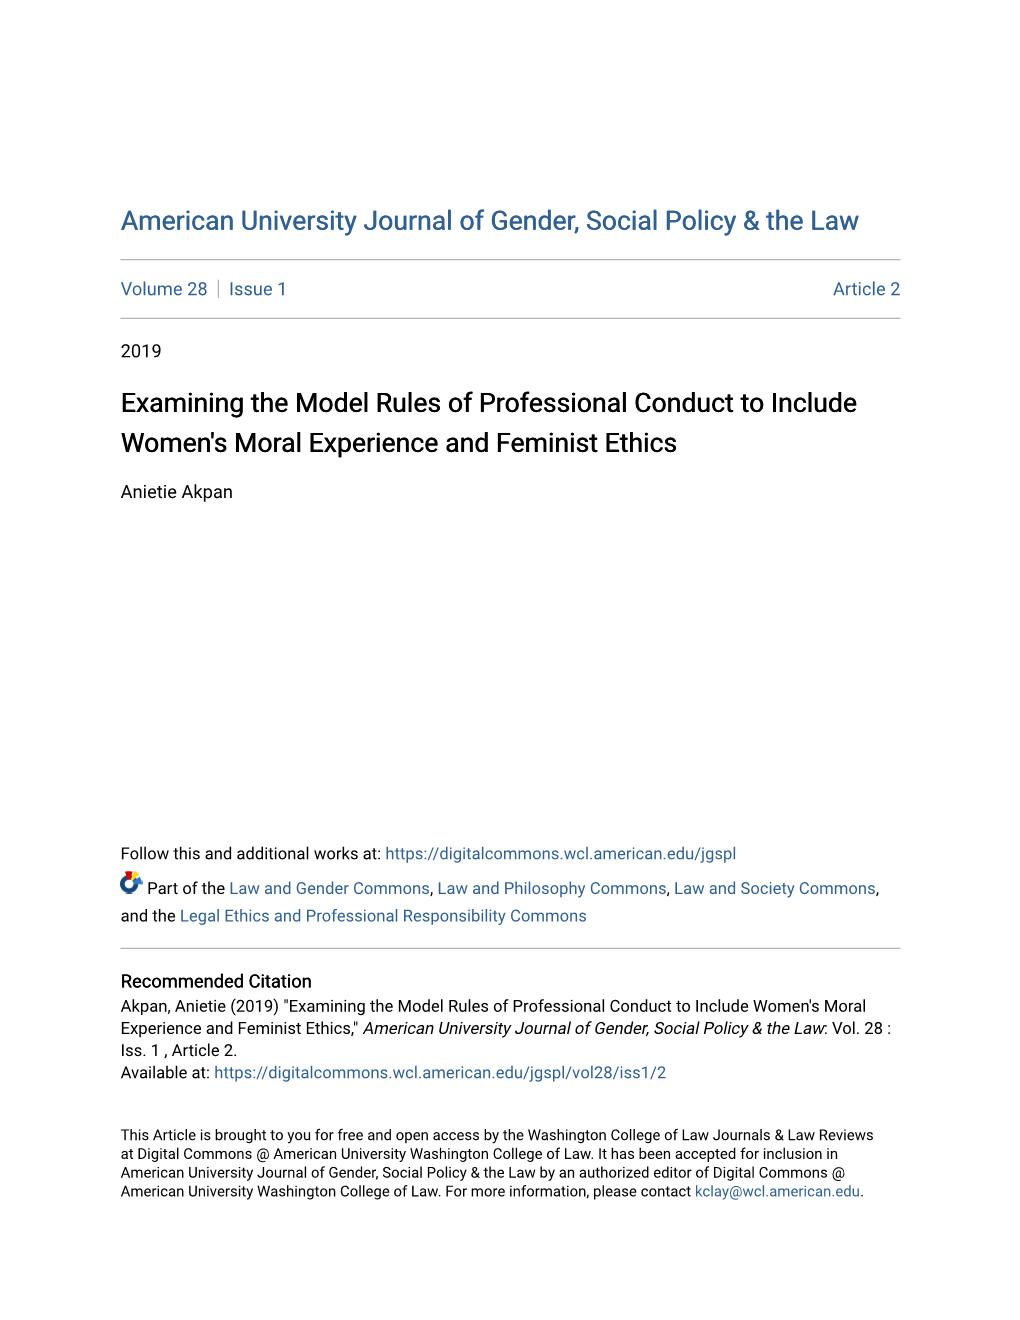 Examining the Model Rules of Professional Conduct to Include Women's Moral Experience and Feminist Ethics